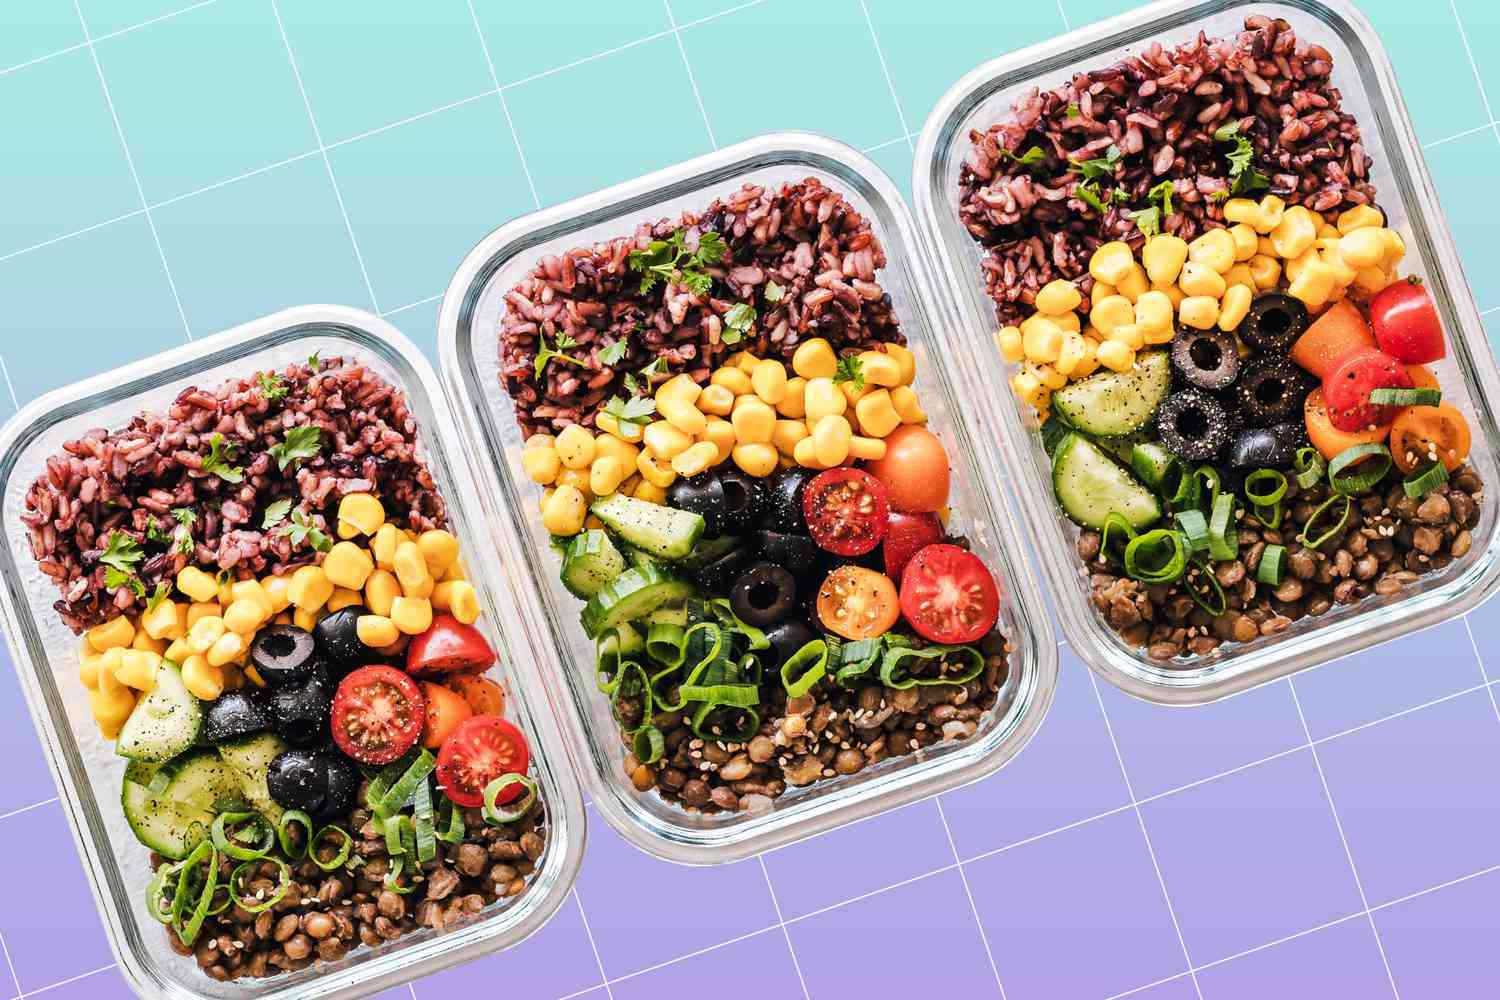 The 8 Best Meal Prep Containers for Quick and Easy Meals, According to Customers